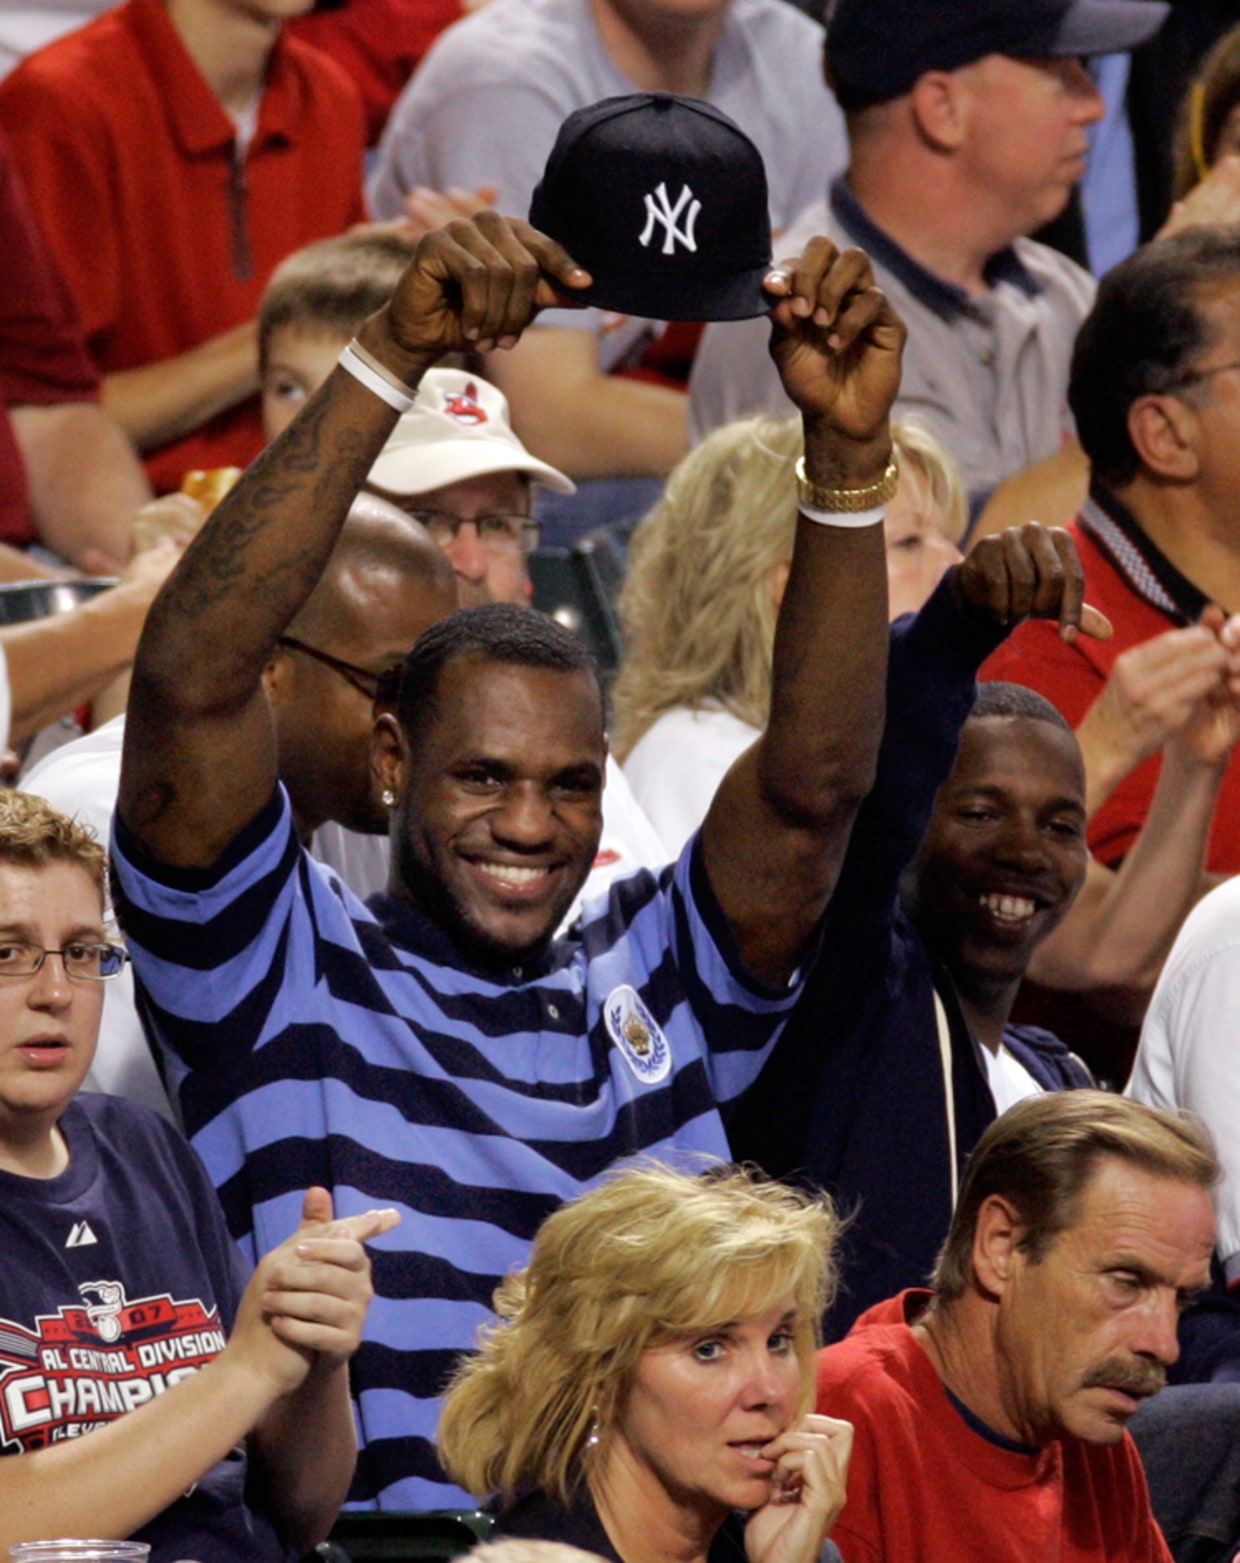 LeBron James is in a New York state of mind